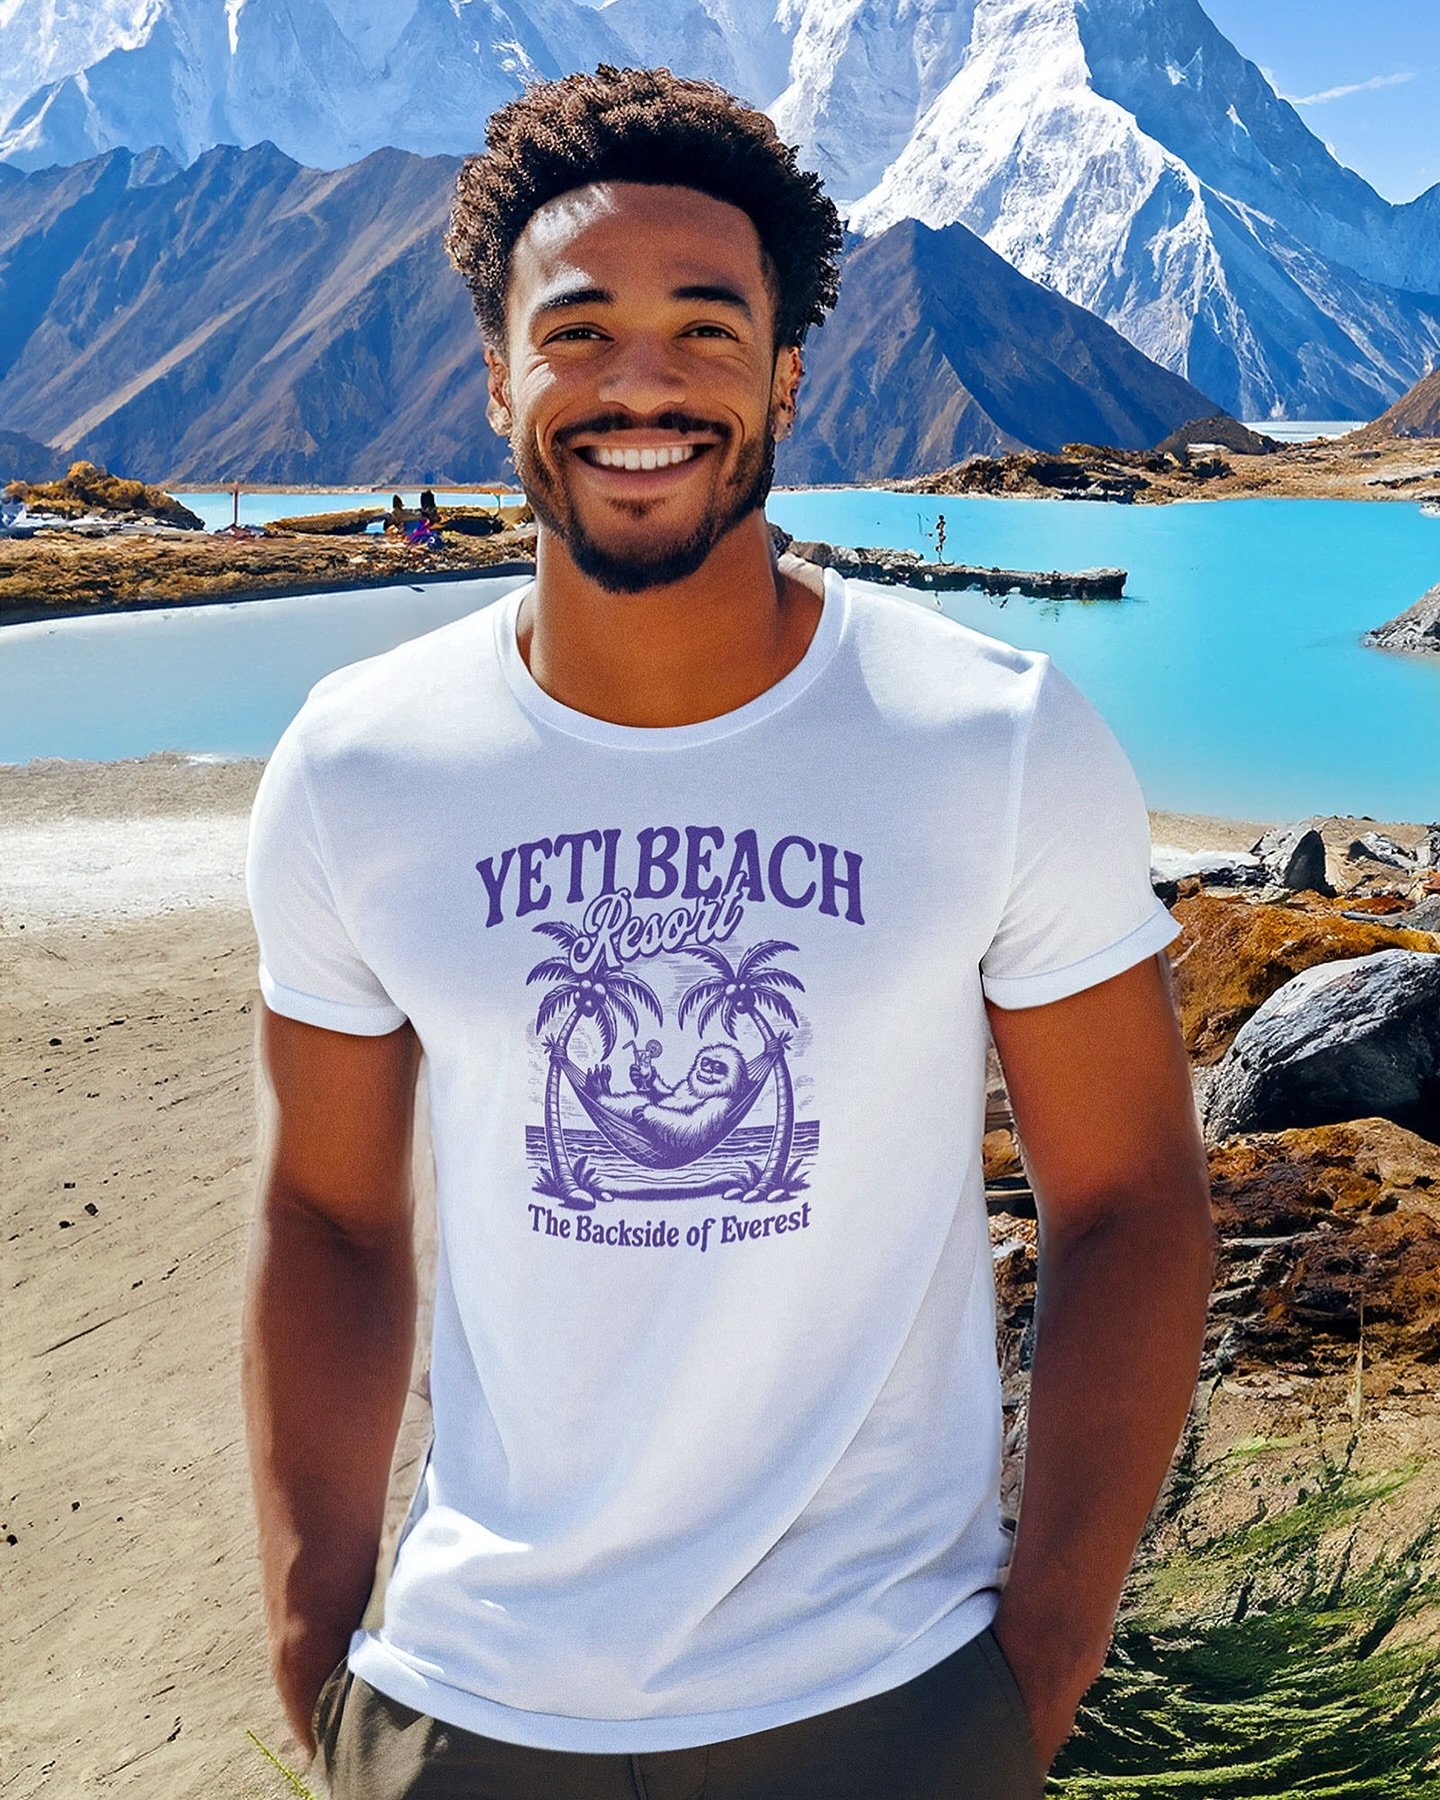 Embark on an expedition of discovery to Yeti Beach Resort: The Backside of Everest unisex t-shirt.

Like uncovering a hidden treasure, this shirt unveils the mysterious and lesser-known realm nestled in the shadow of Everest&rsquo;s mighty peak.

htt